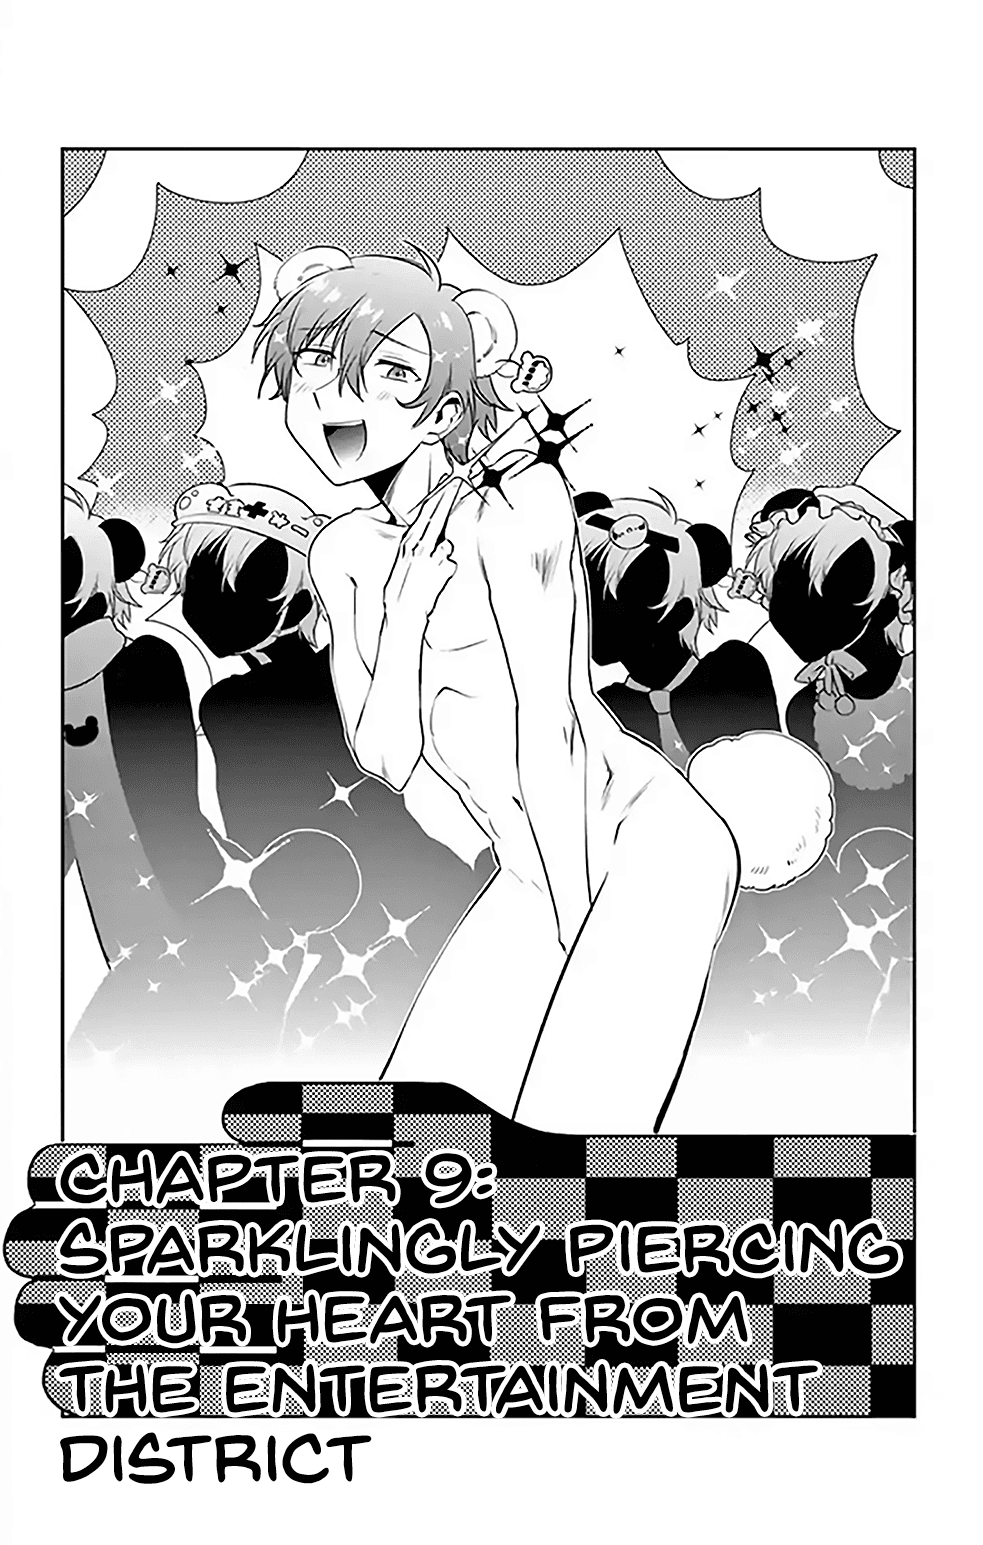 Nuigurumi Kurasshu Vol.1 Chapter 9: Sparklingly Piercing Your Heart From The Entertainment District - Picture 2